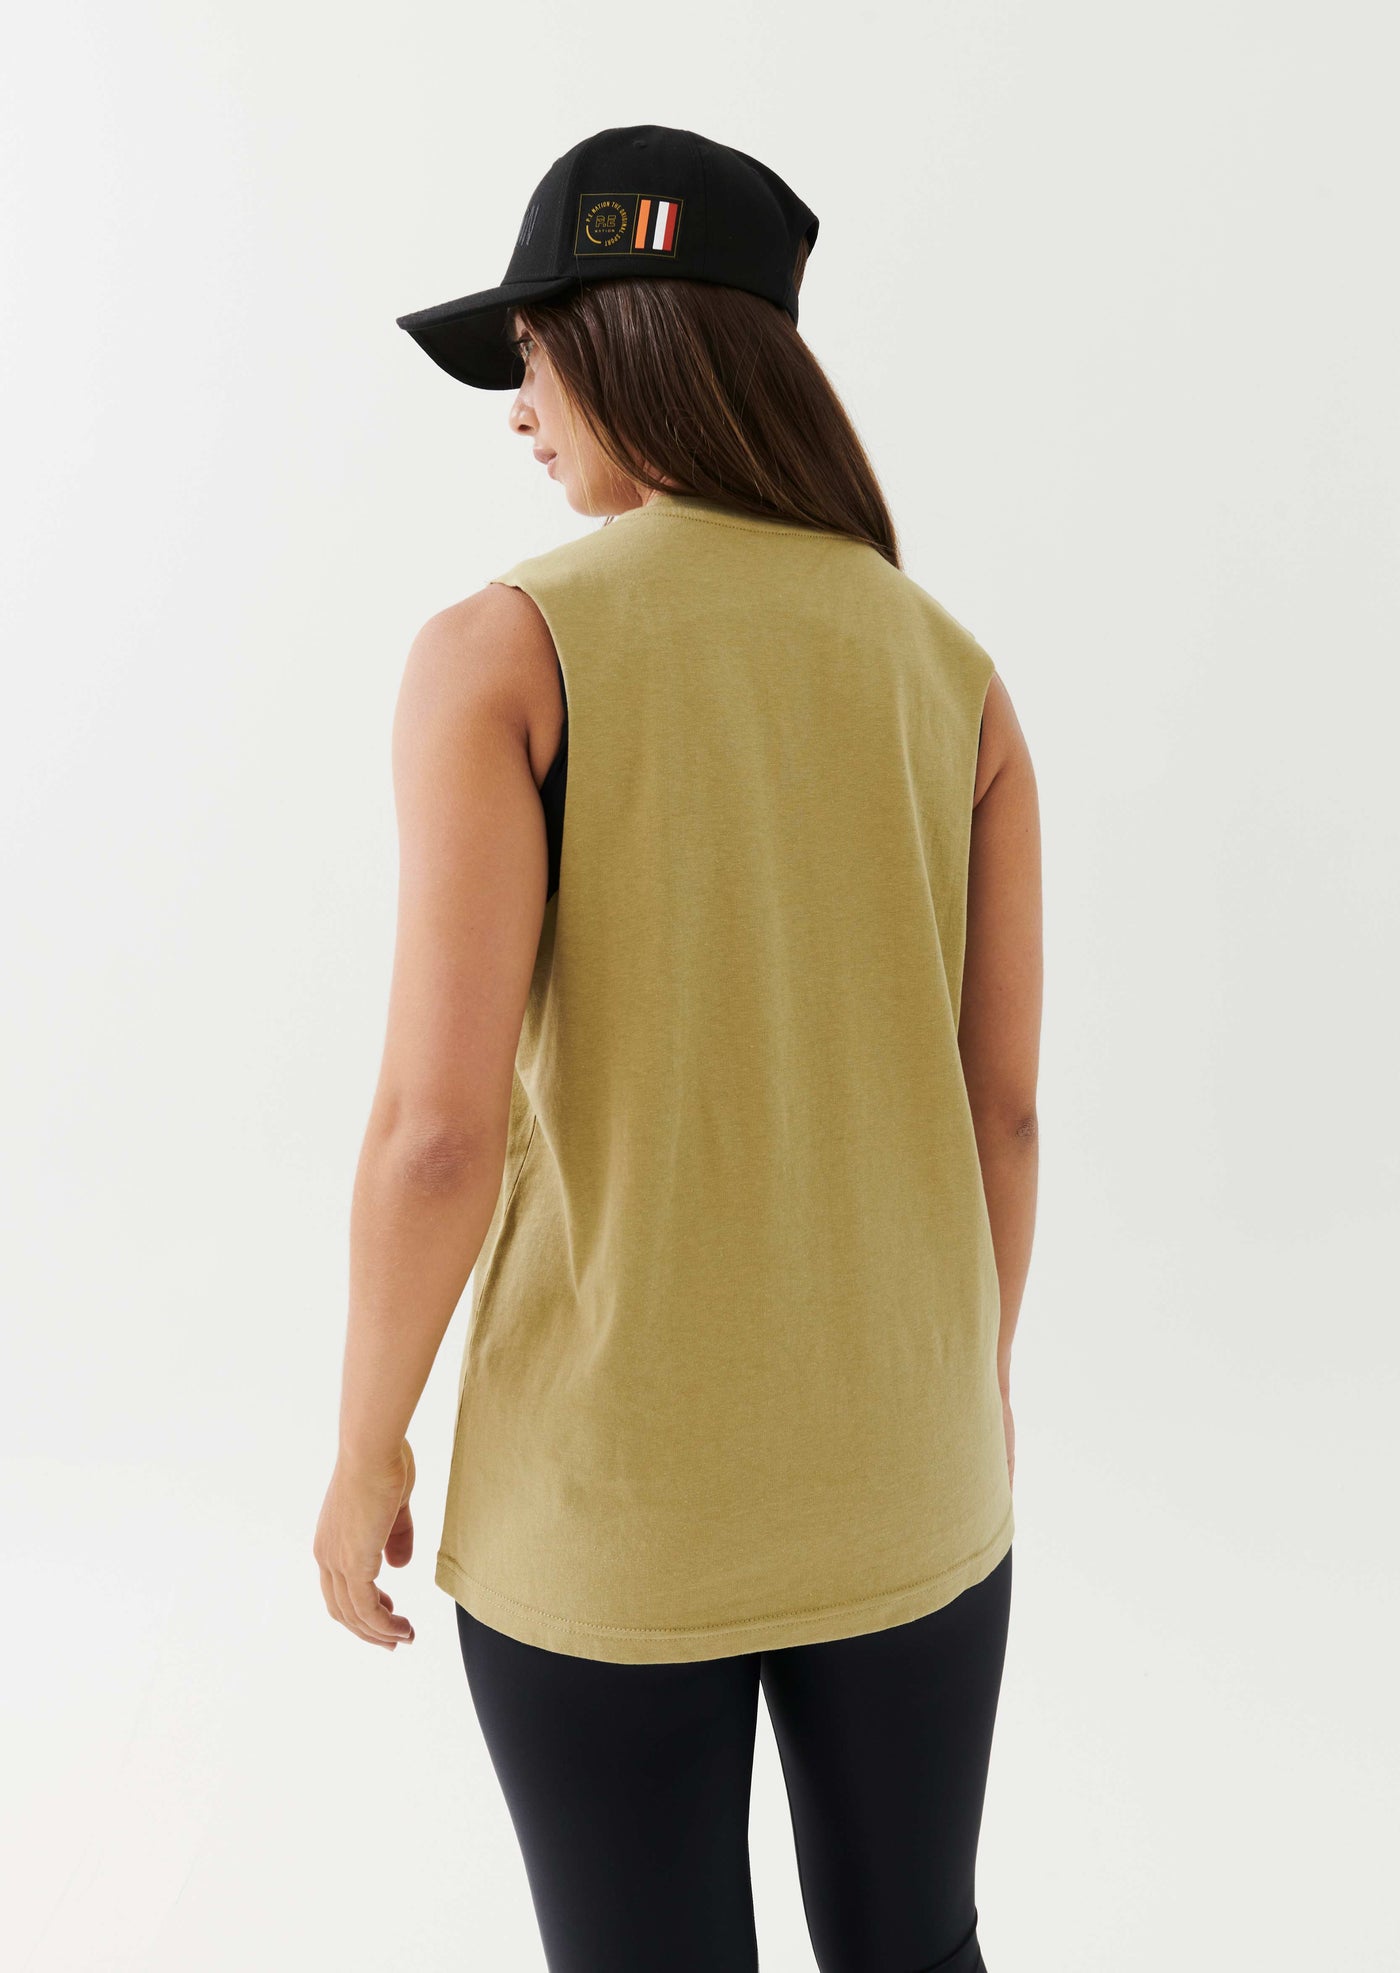 ALIGNMENT TANK IN OLIVE GRAY